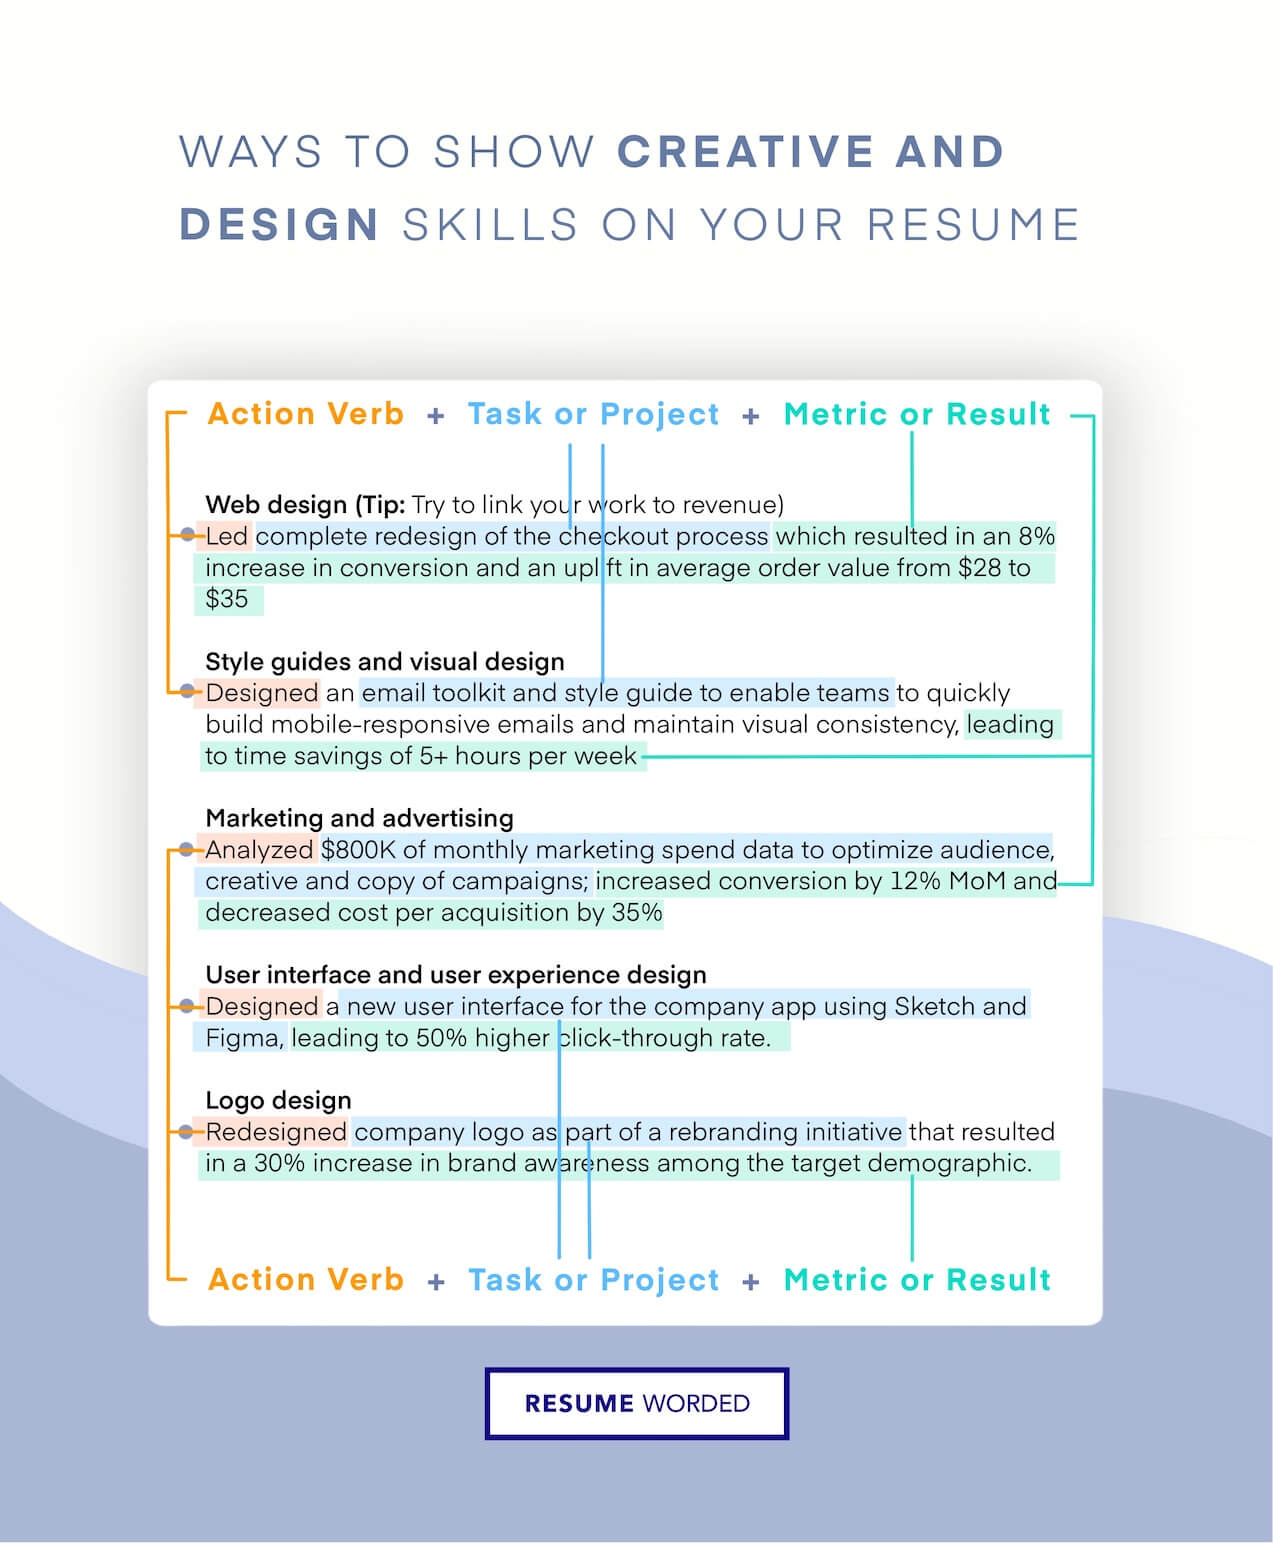 Highlight sustainability and eco-friendly design - Architect / Architecture Resume